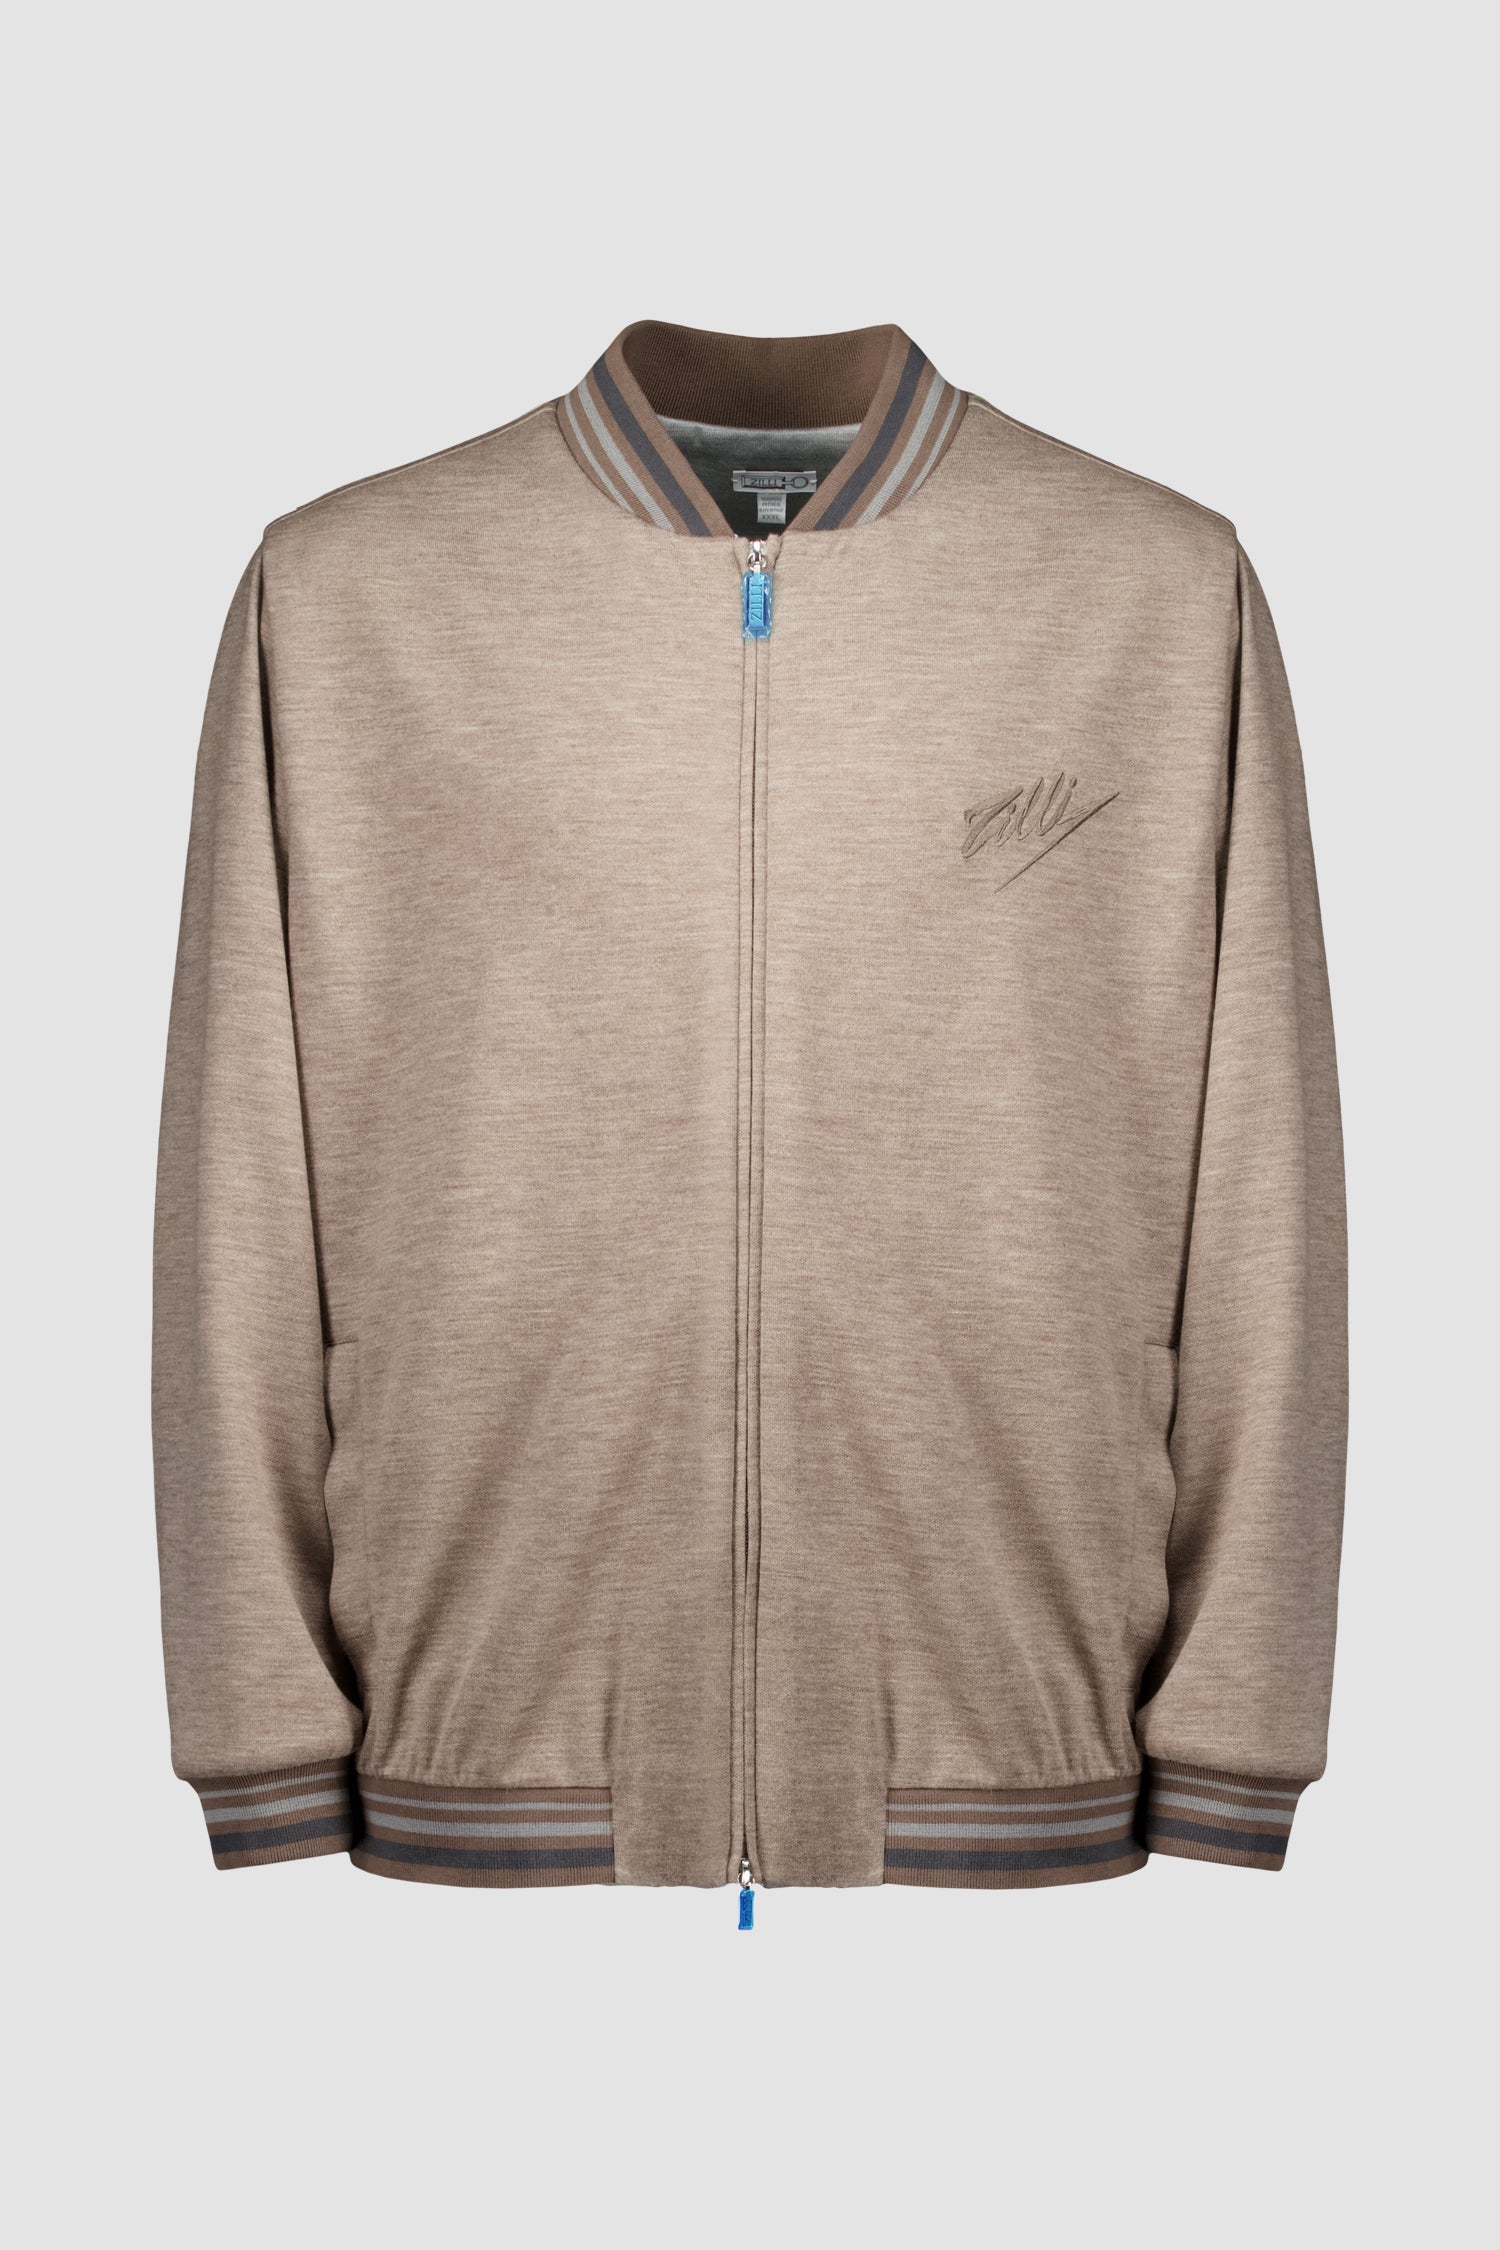 Zilli Taupe Signature Embroidery Bomber